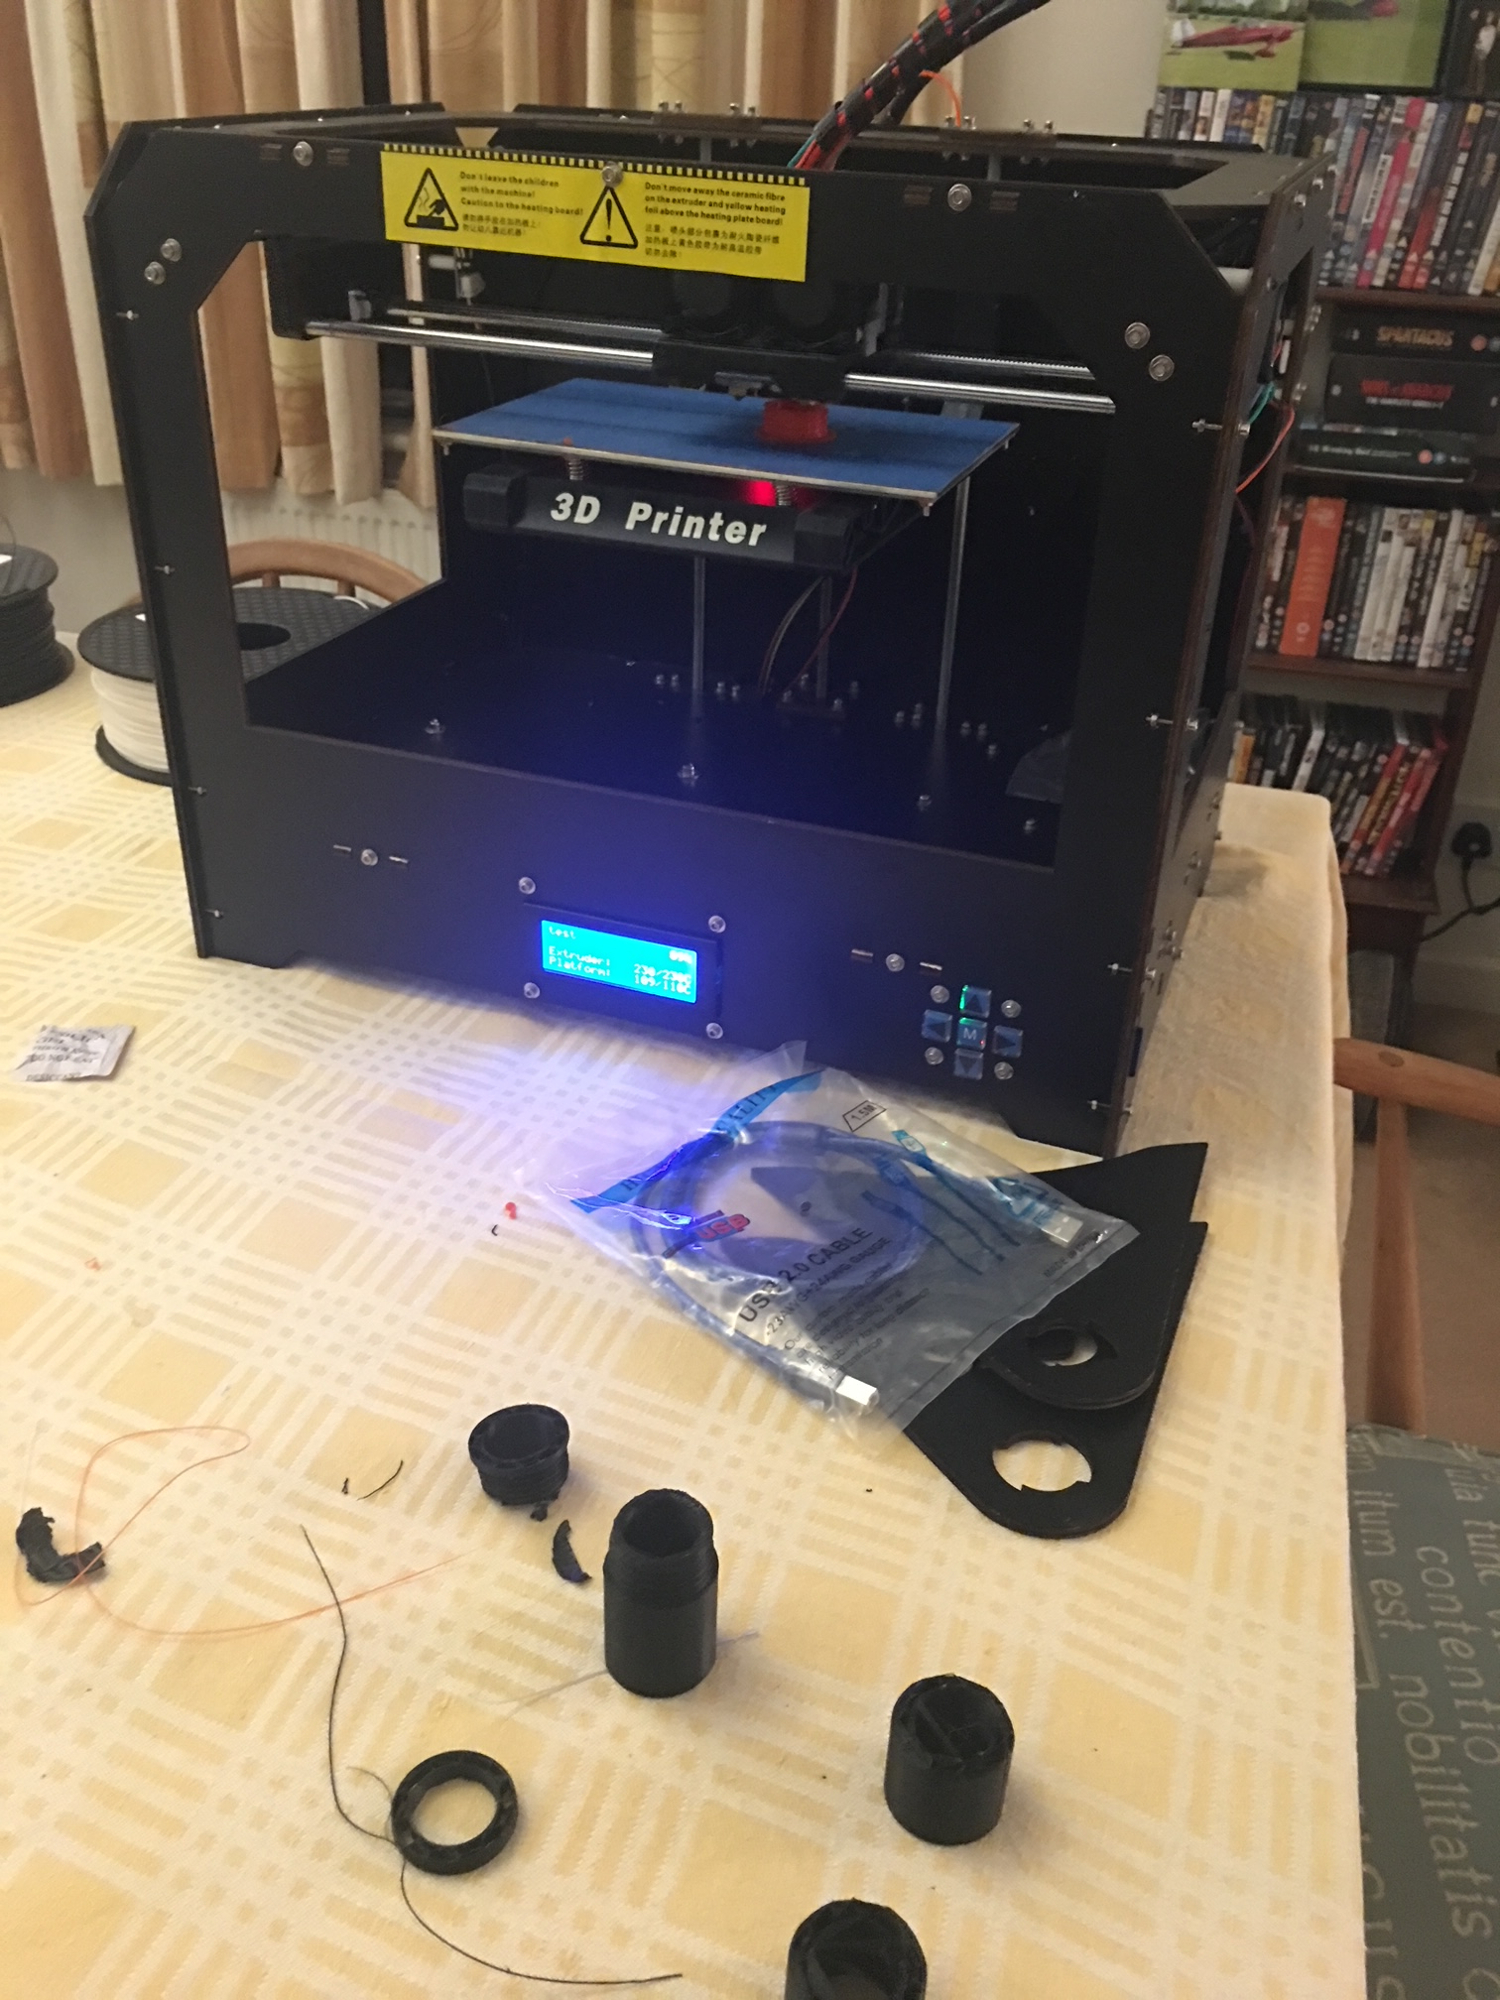 Second hand 'home assembled' 3D printer more than 5 years old.Photo by A. Howse